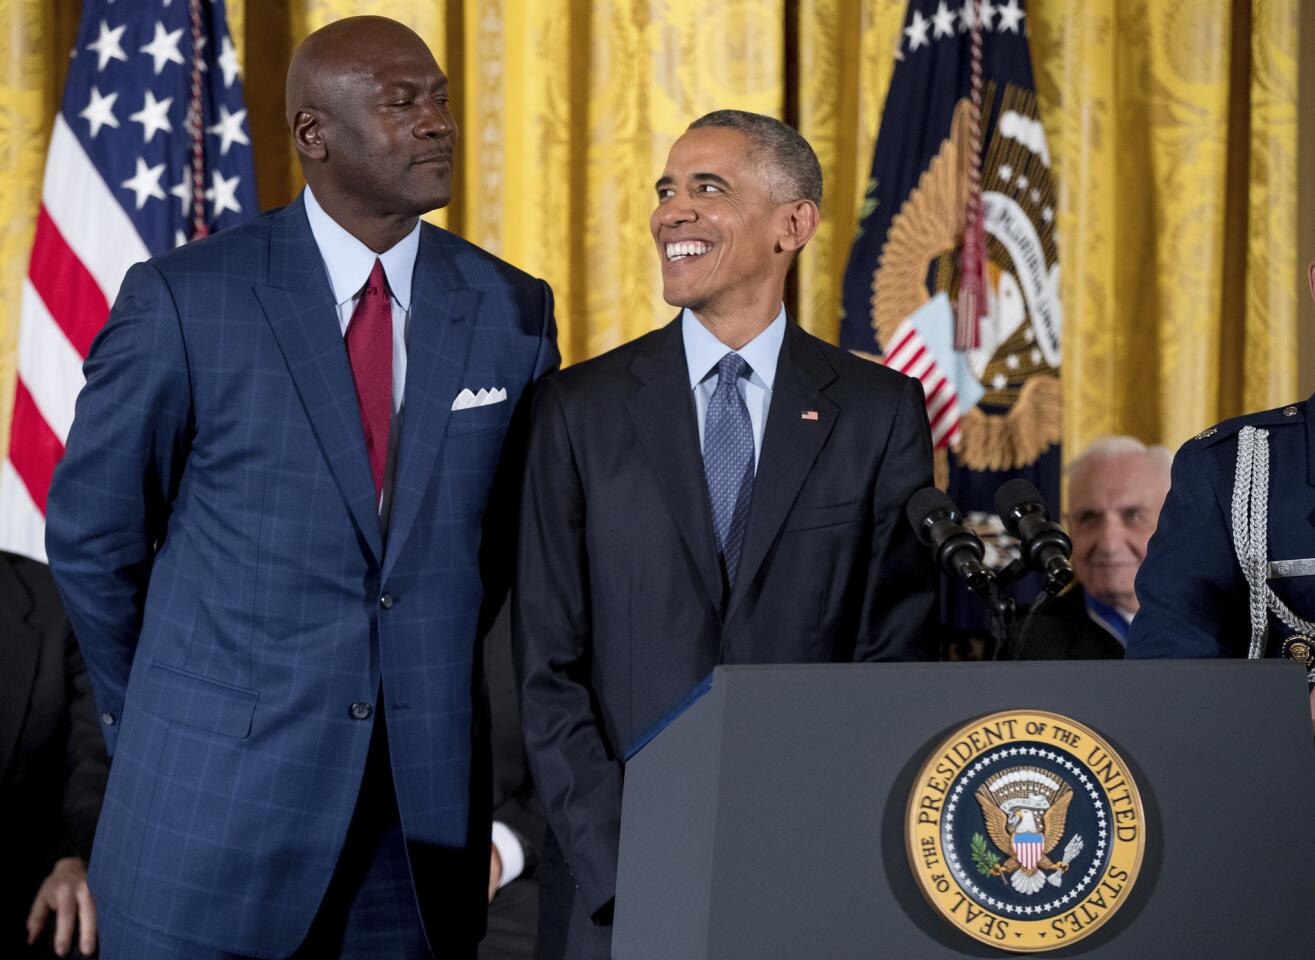 President Barack Obama, center, reacts as former NBA basketball player Michael Jordan, left, playfully looms over him at a Presidential Medal of Freedom ceremony in the East Room of the White House, Tuesday, Nov. 22, 2016, in Washington.